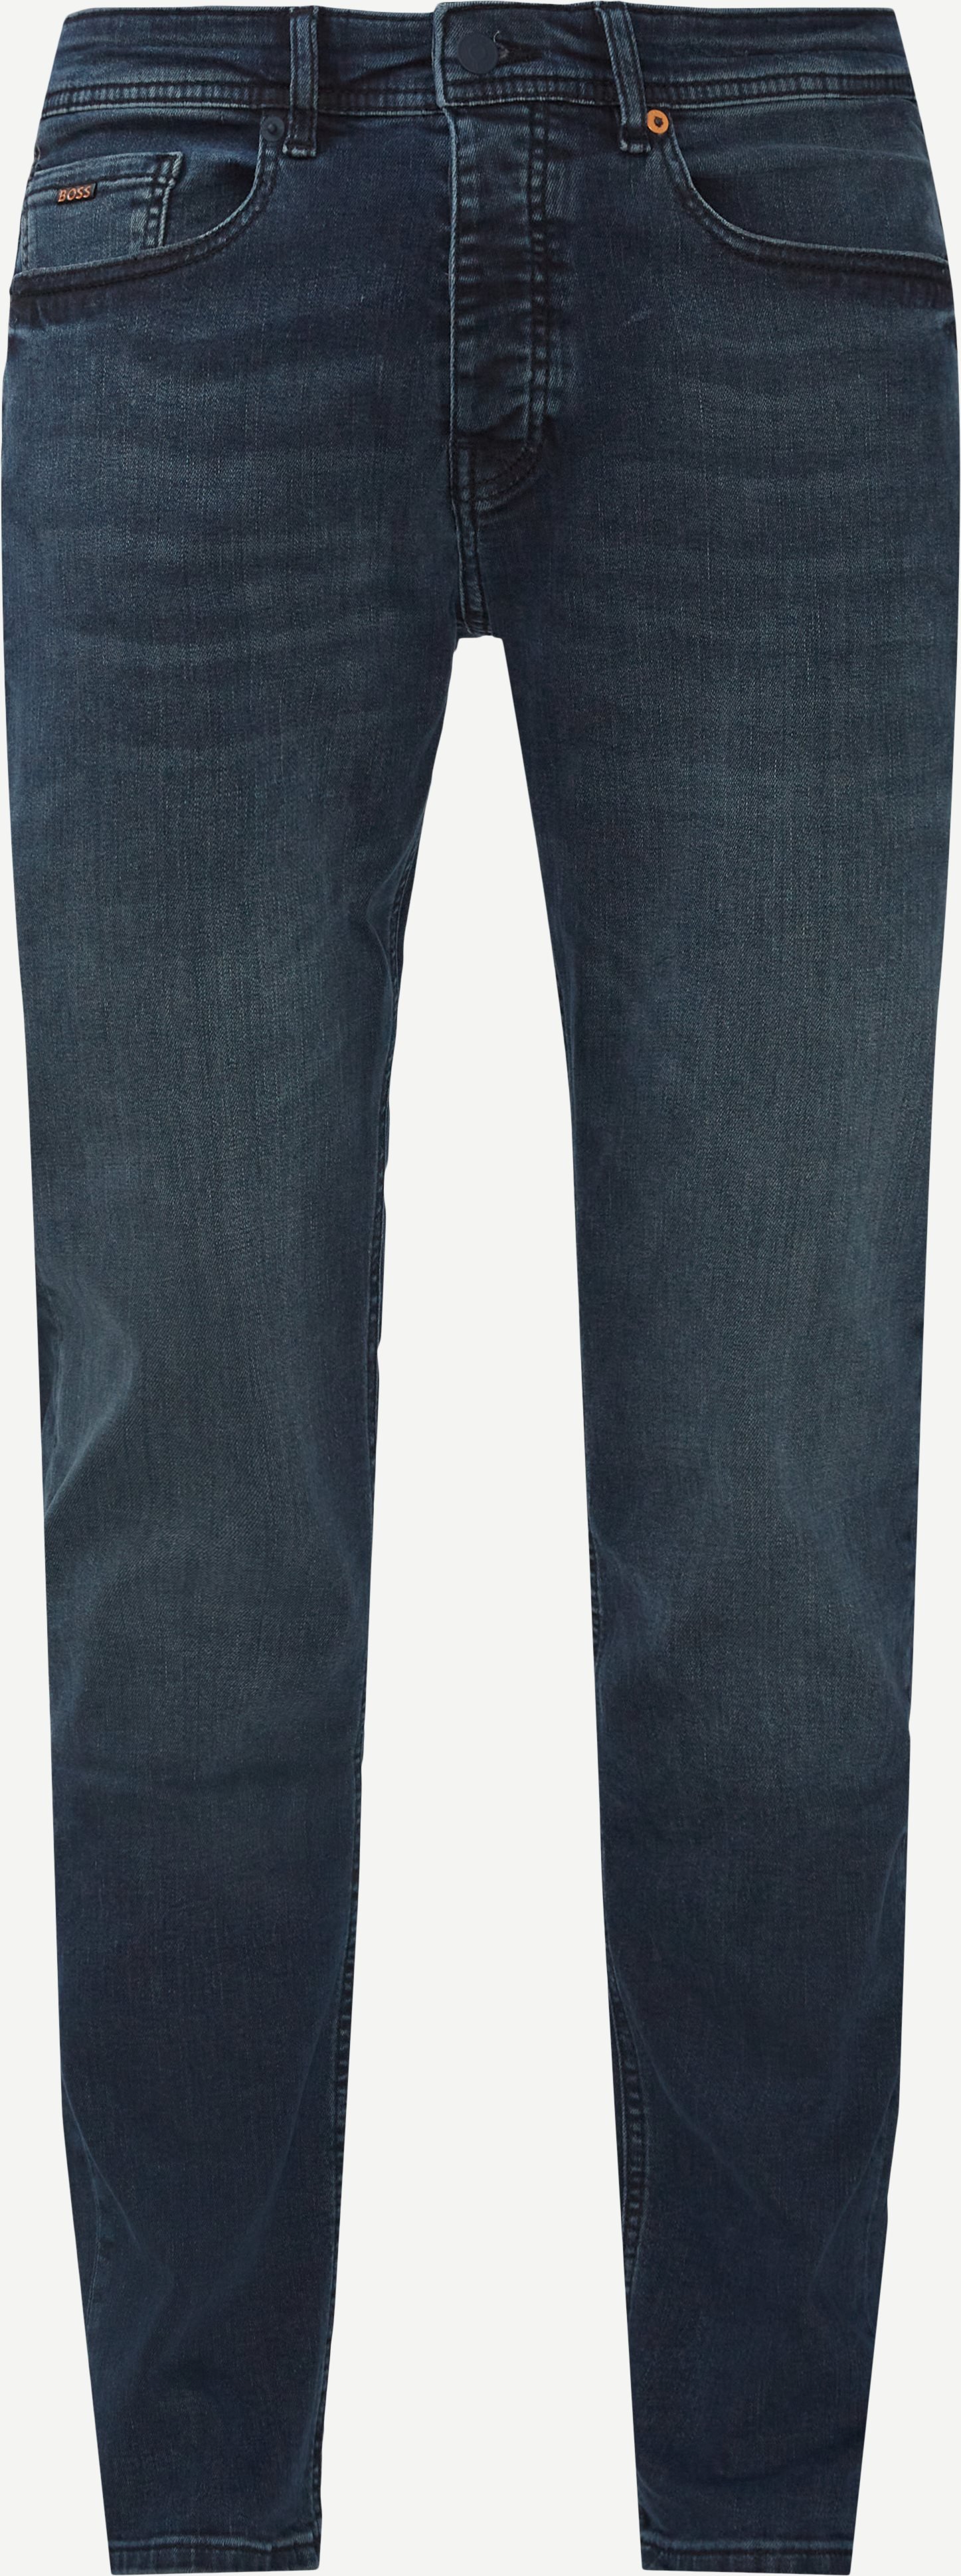 Trousers - Tapered fit - Denim